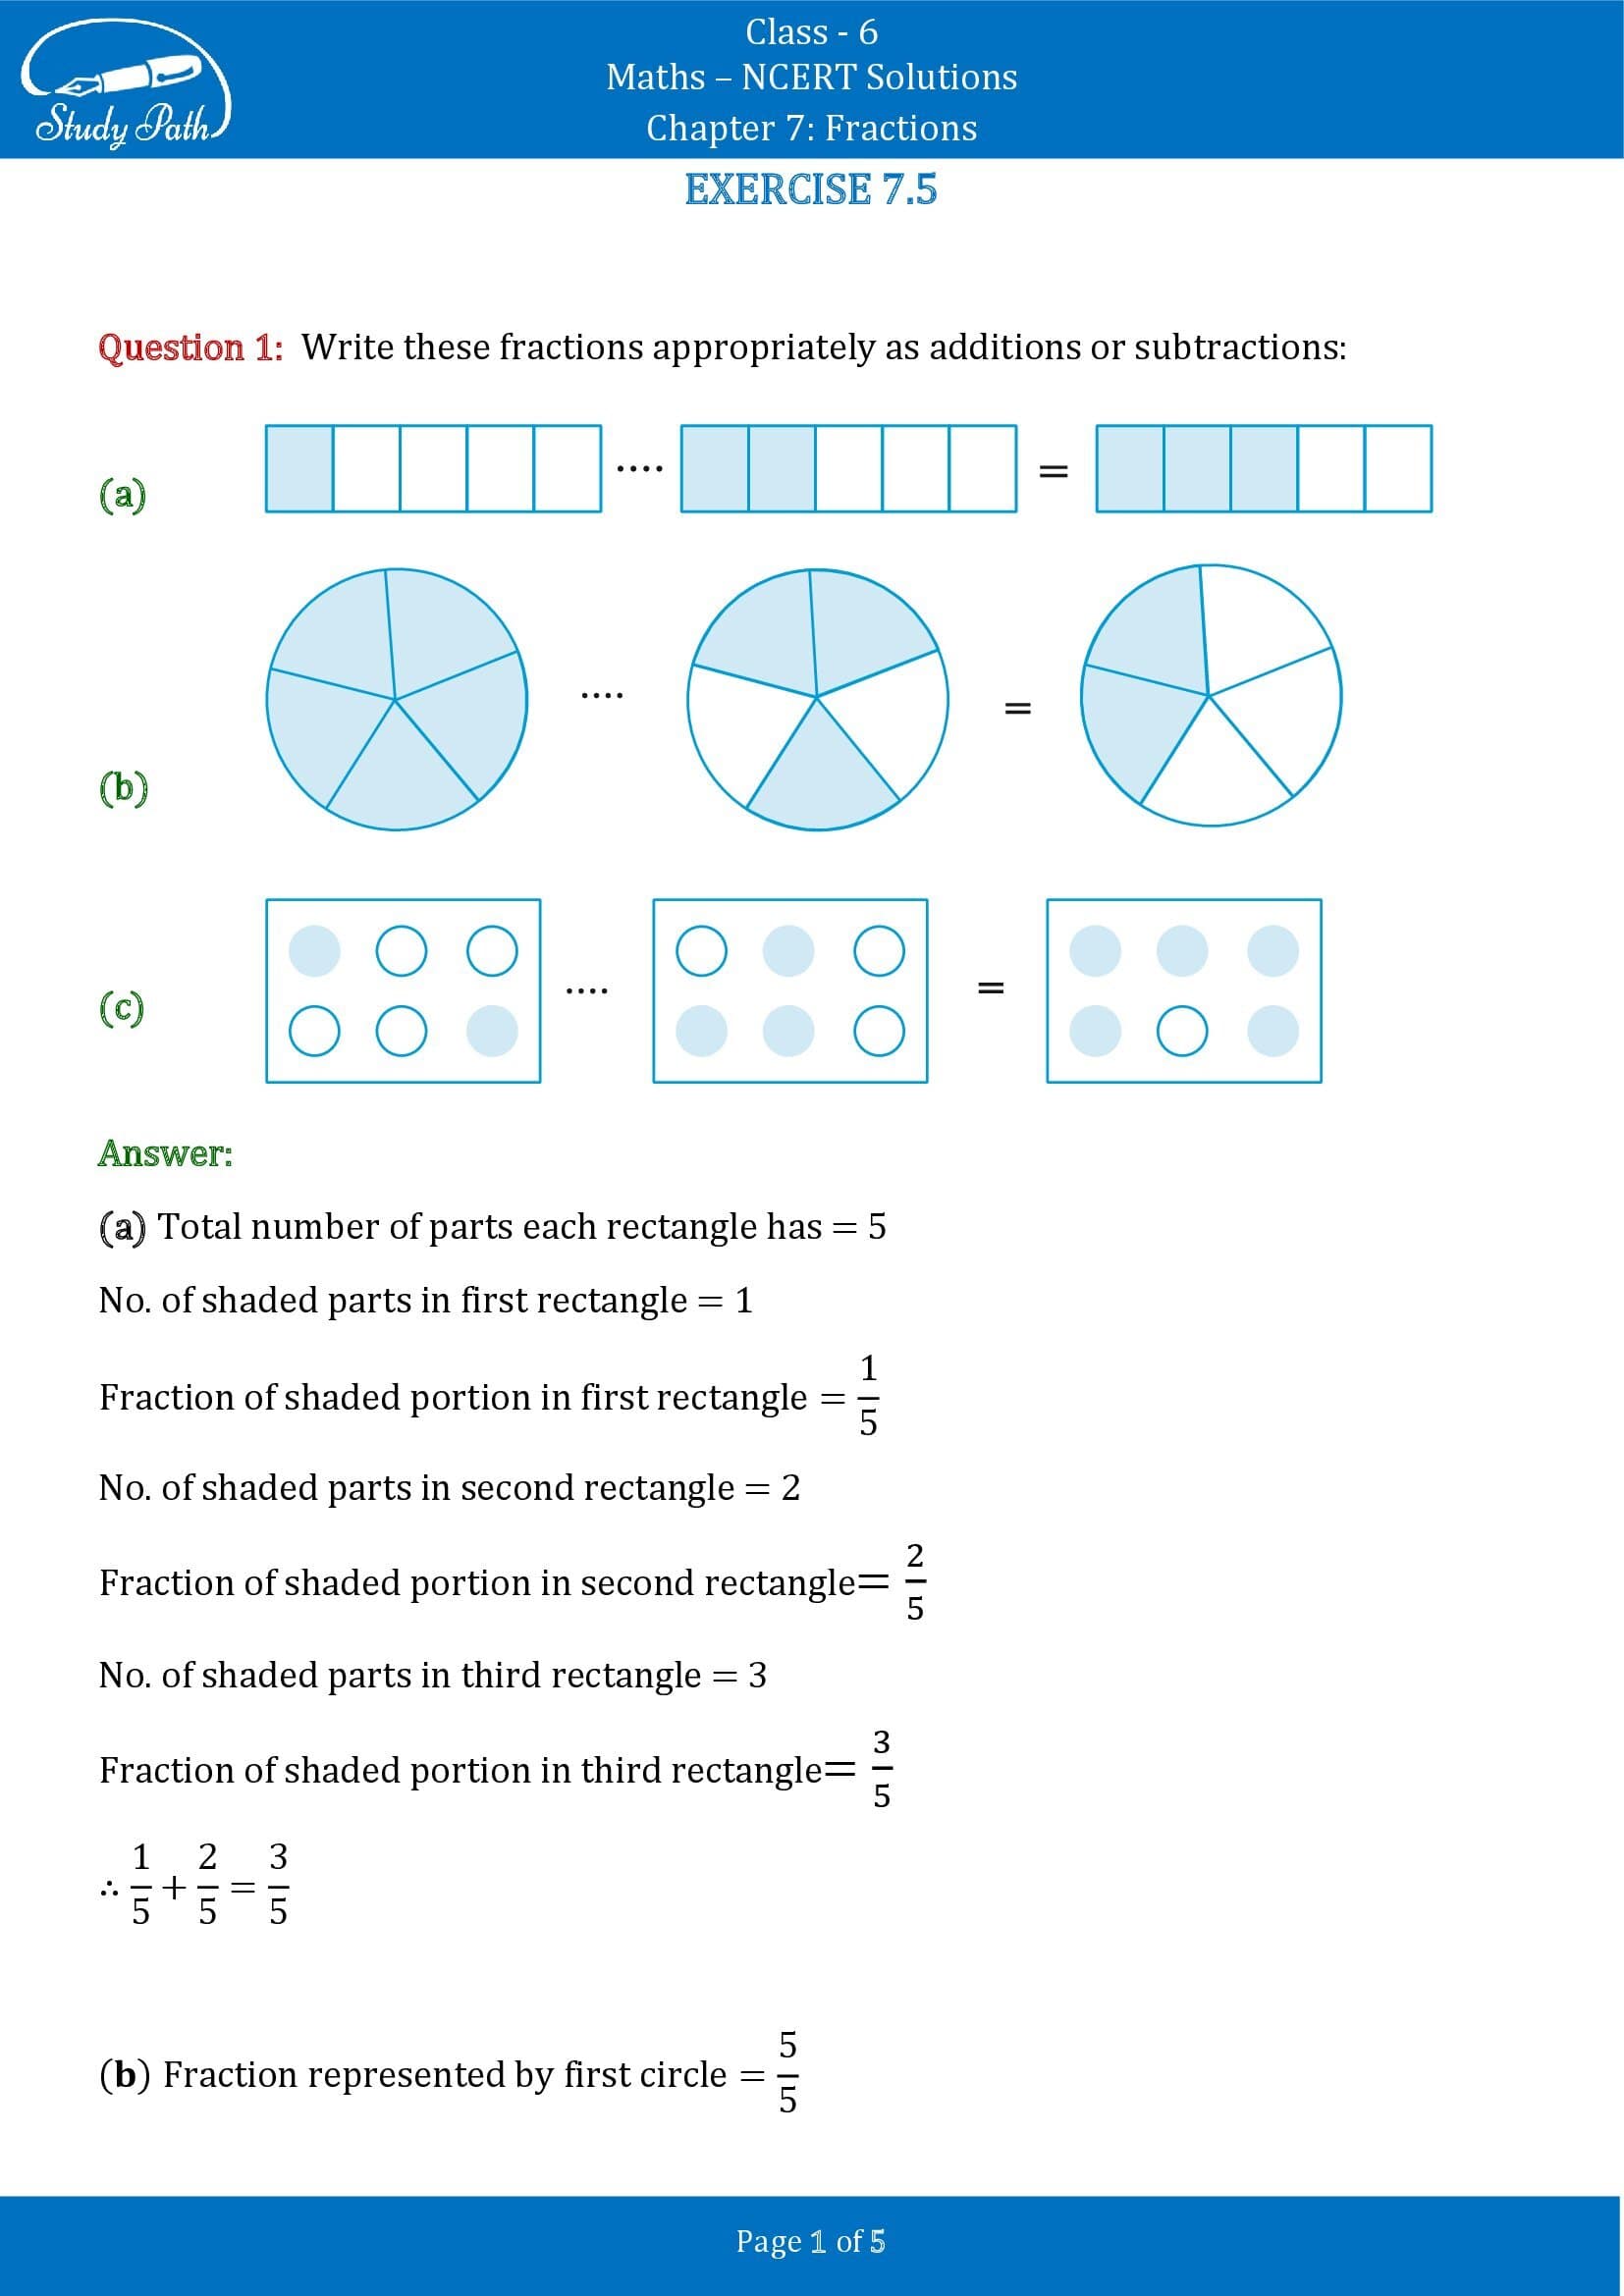 NCERT Solutions for Class 6 Maths Chapter 7 Fractions Exercise 7.5 00001